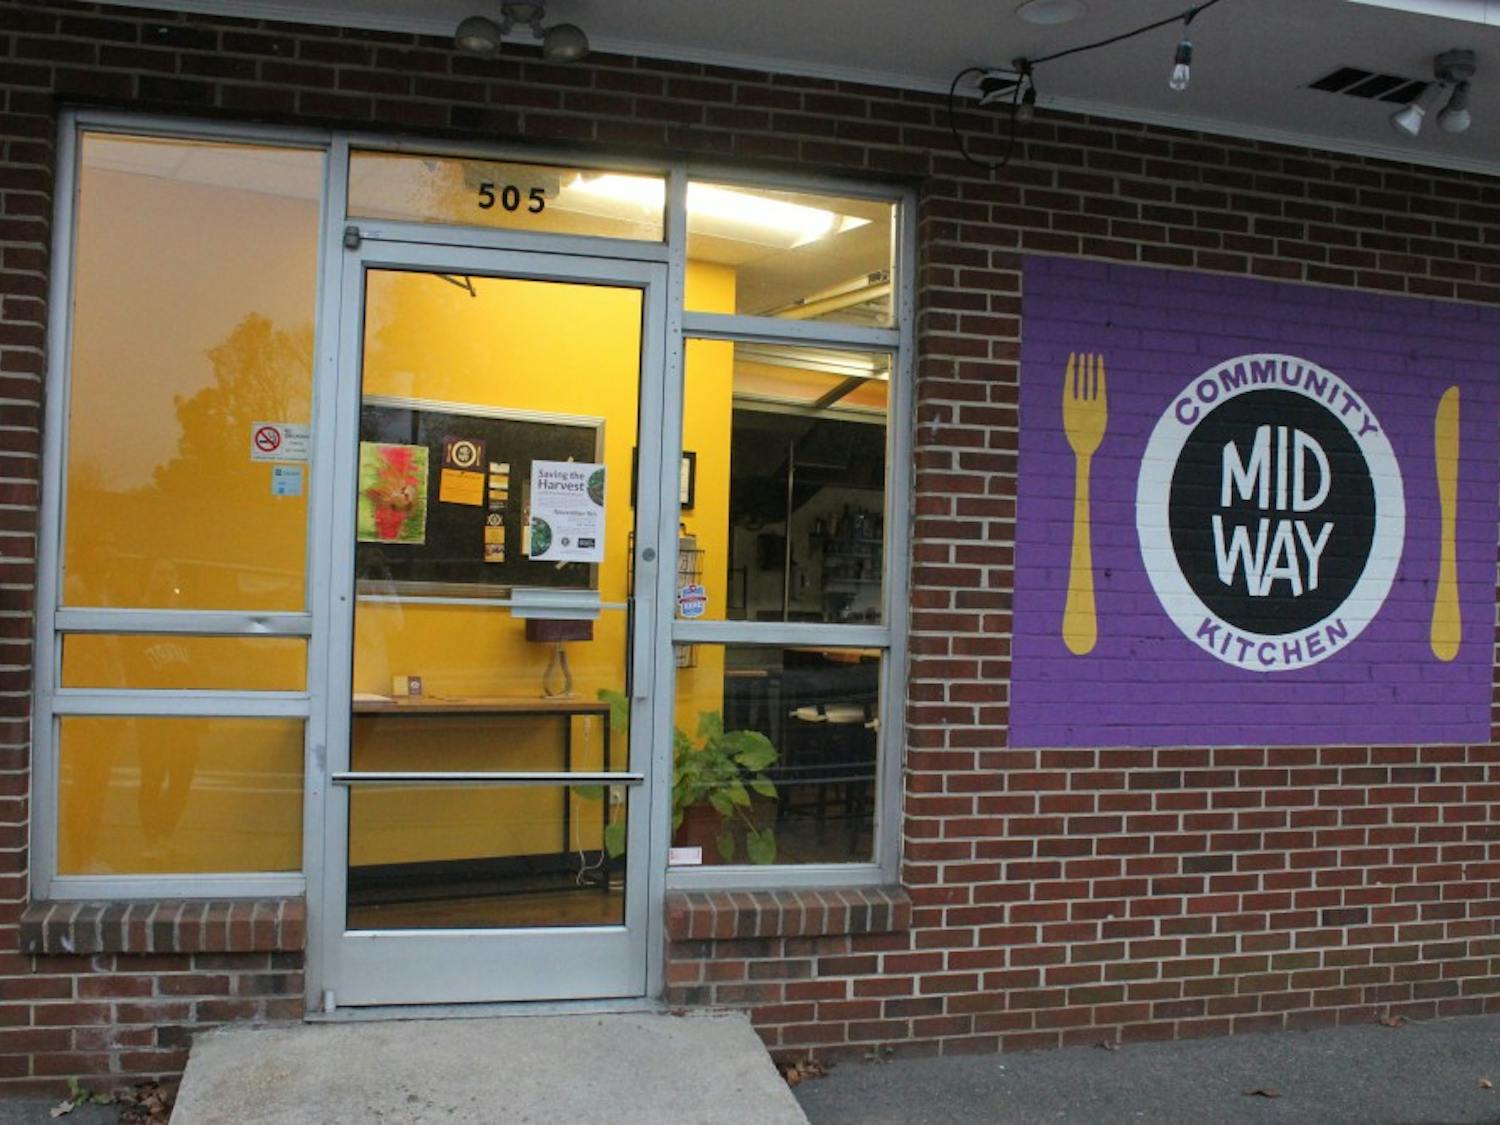 Midway Community Kitchen, a popular event venue in Chapel Hill, NC, is having a pop-up event for TABLE. 